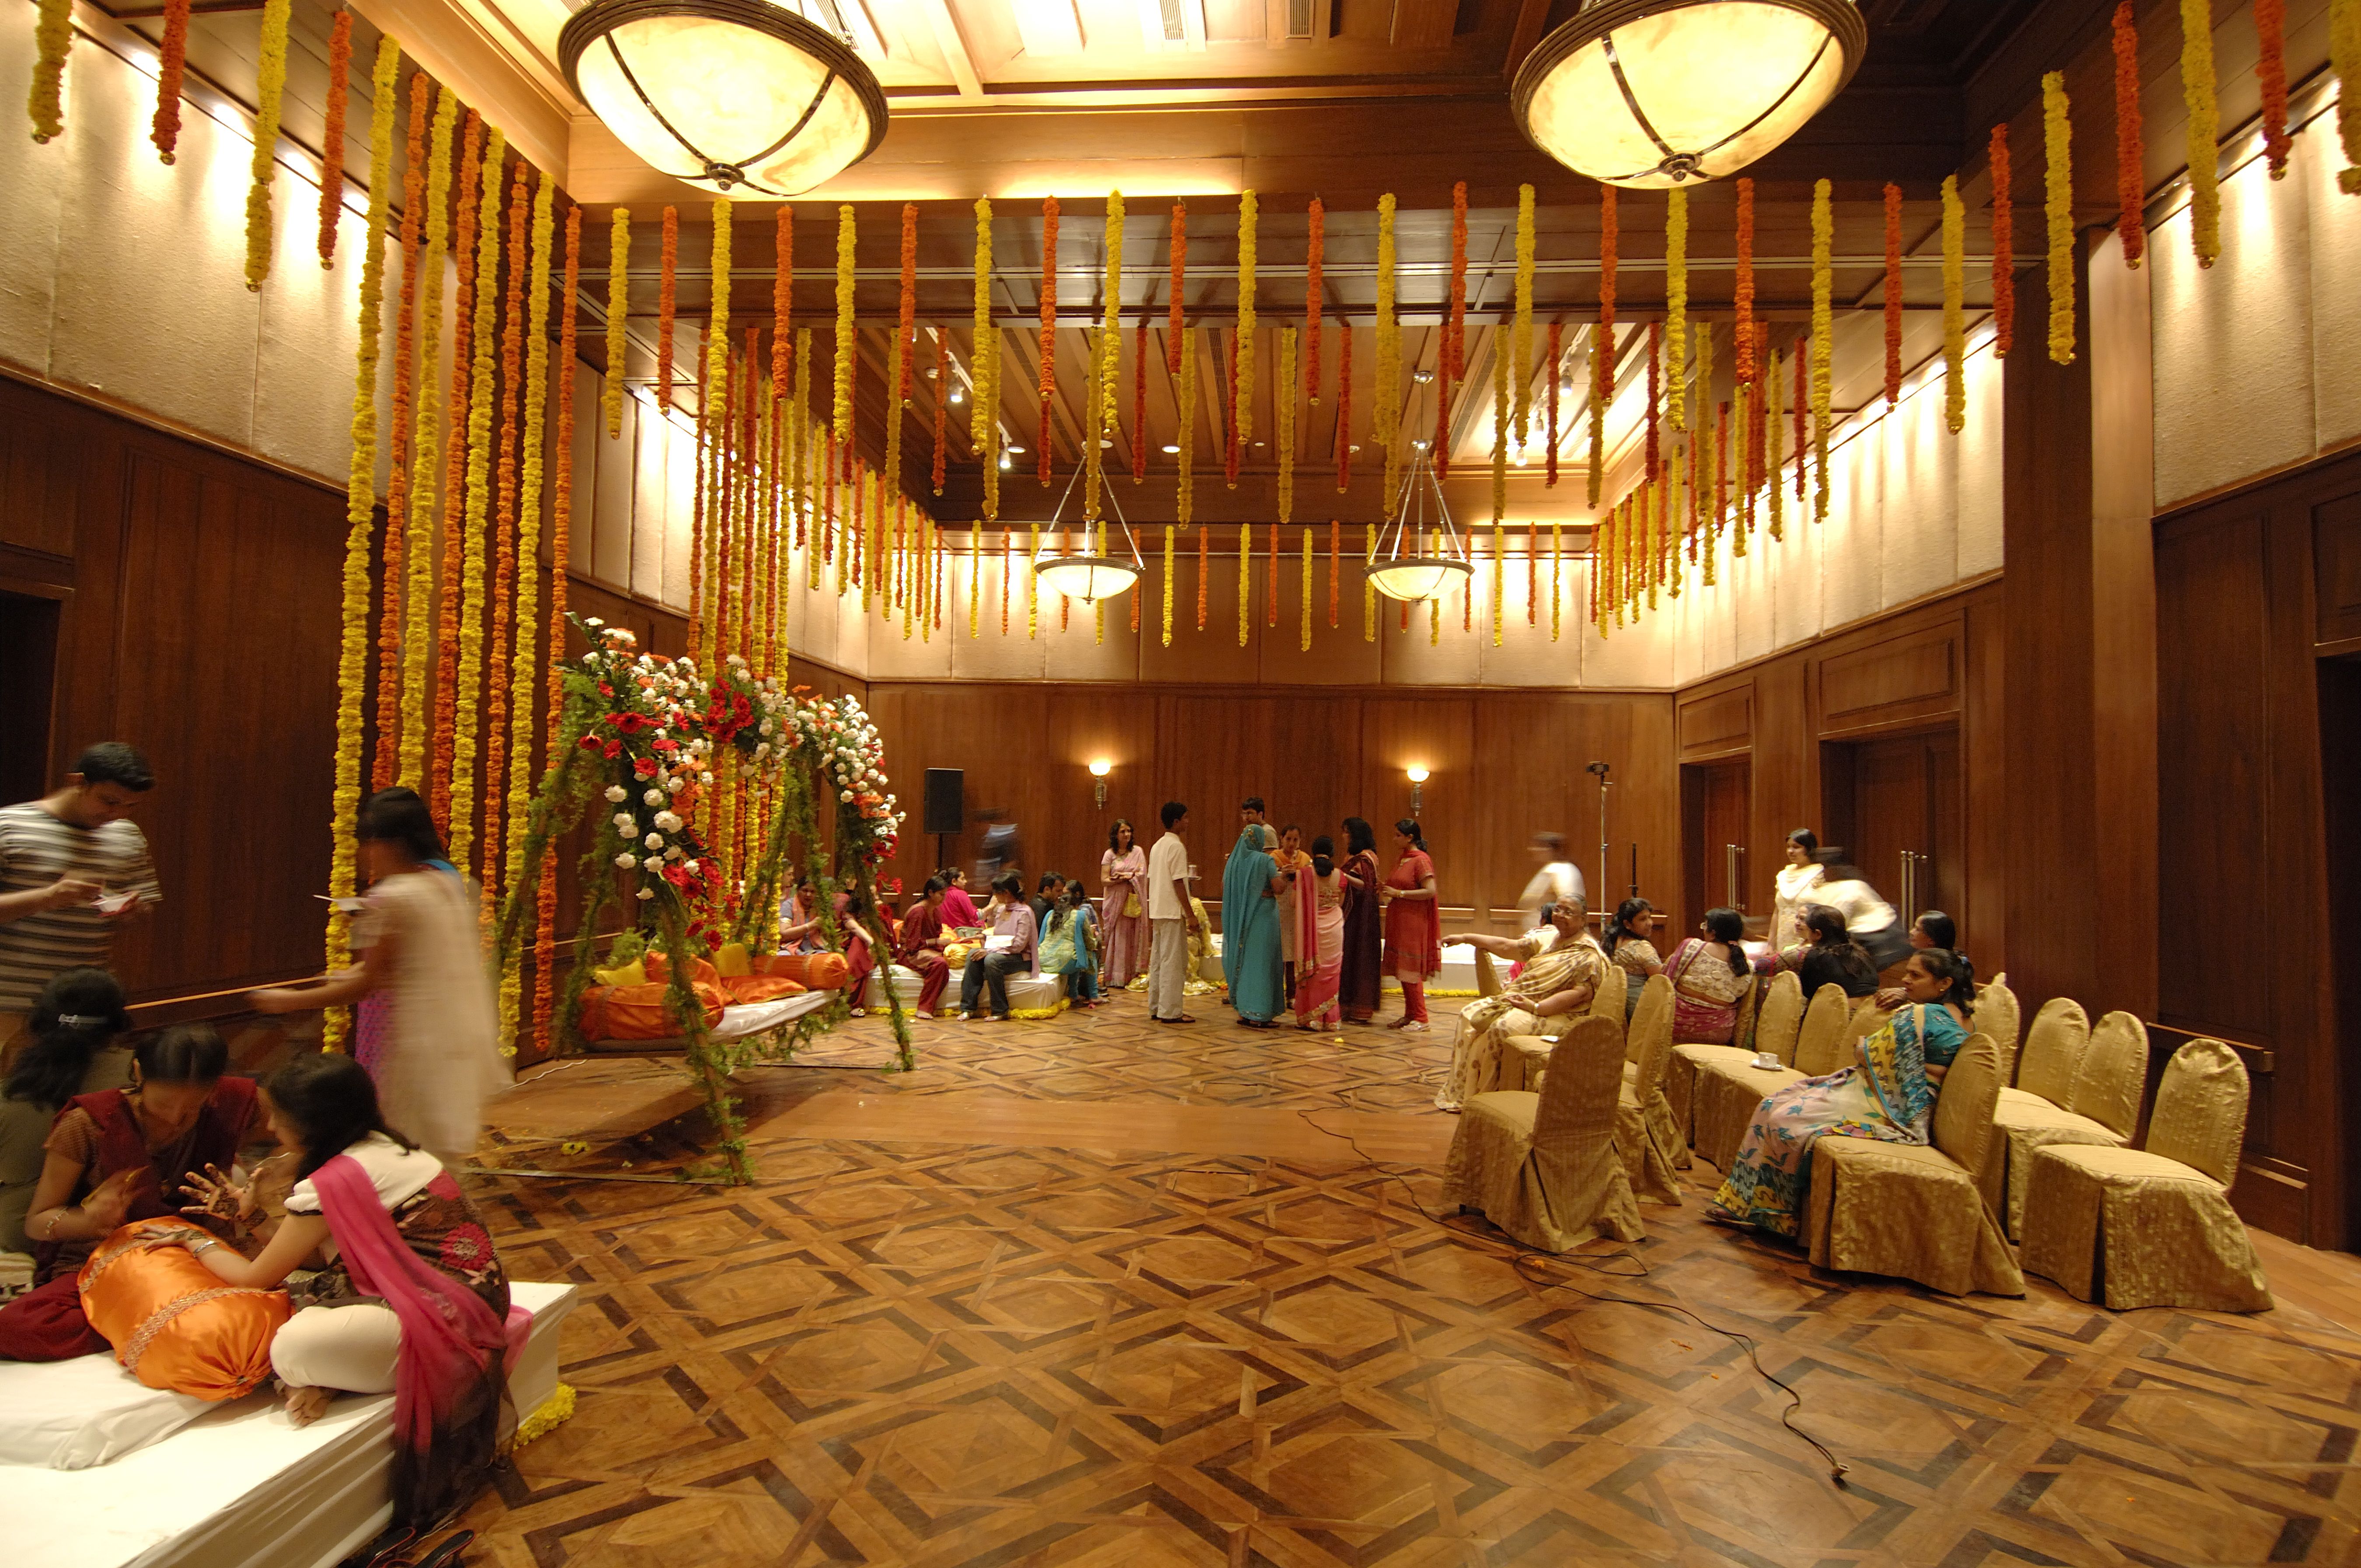 Top 5 Places for Destination Weddings in India